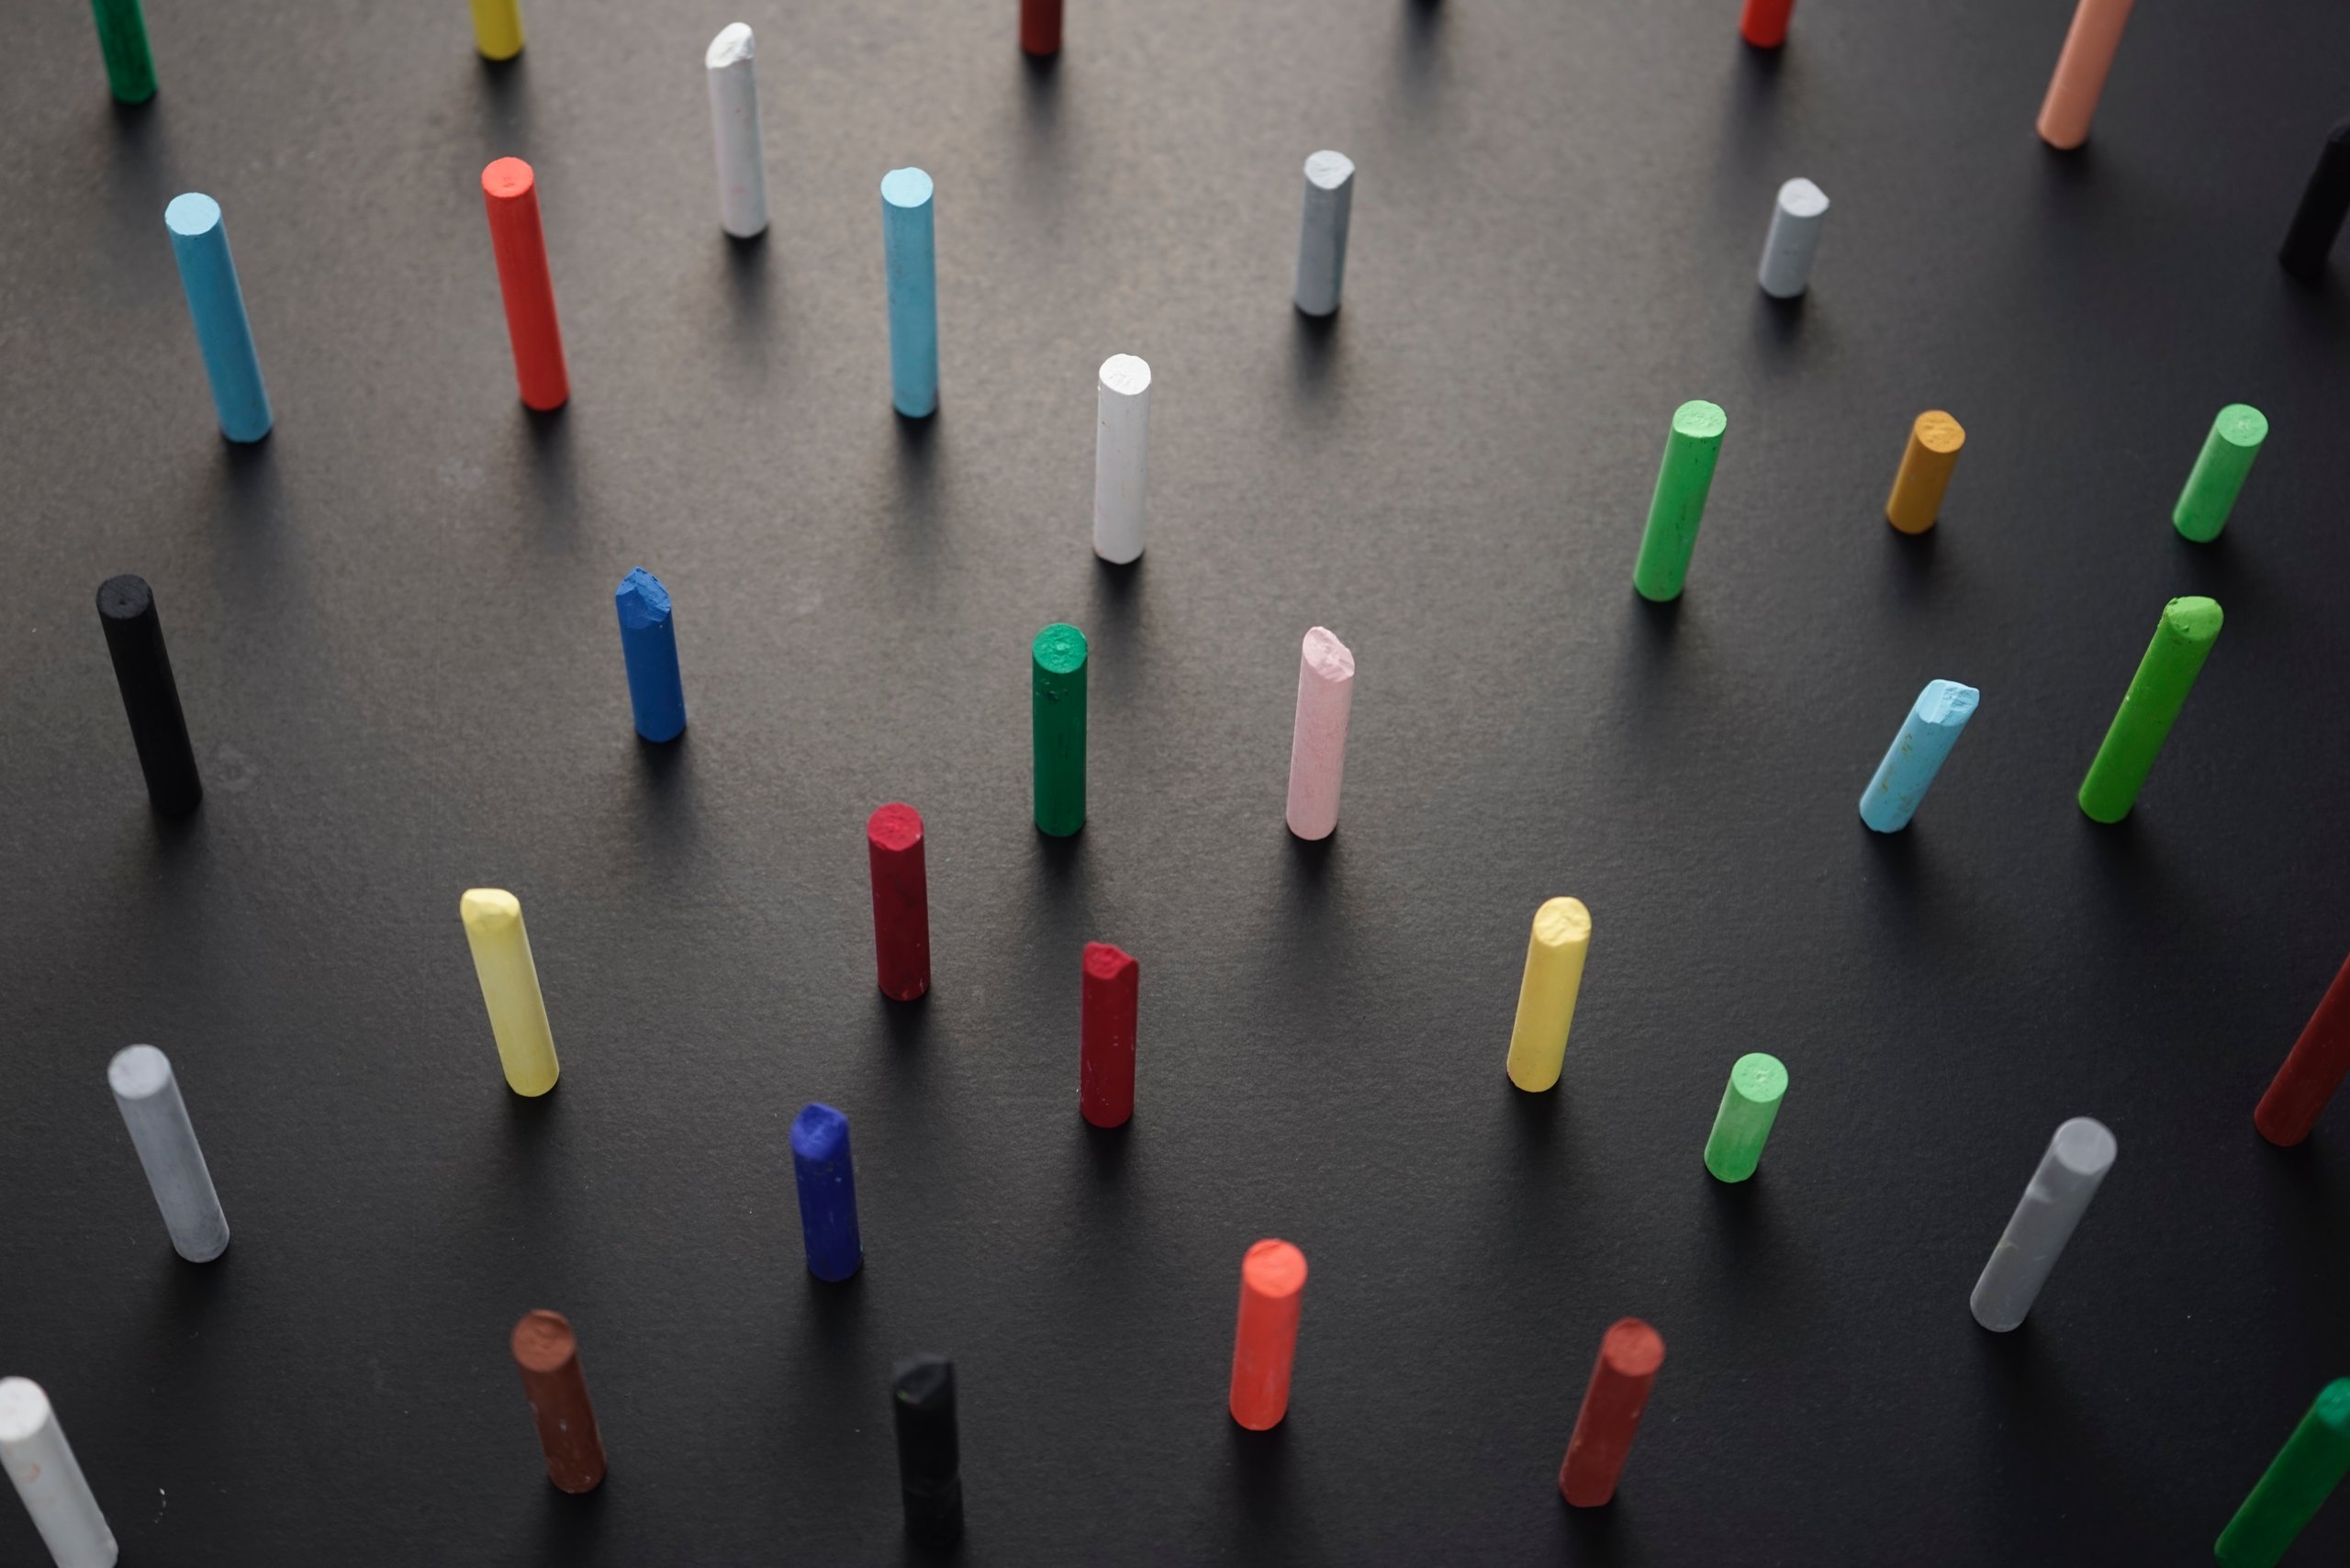 Chalk pastel crayons placed upright on a dark grey surface.